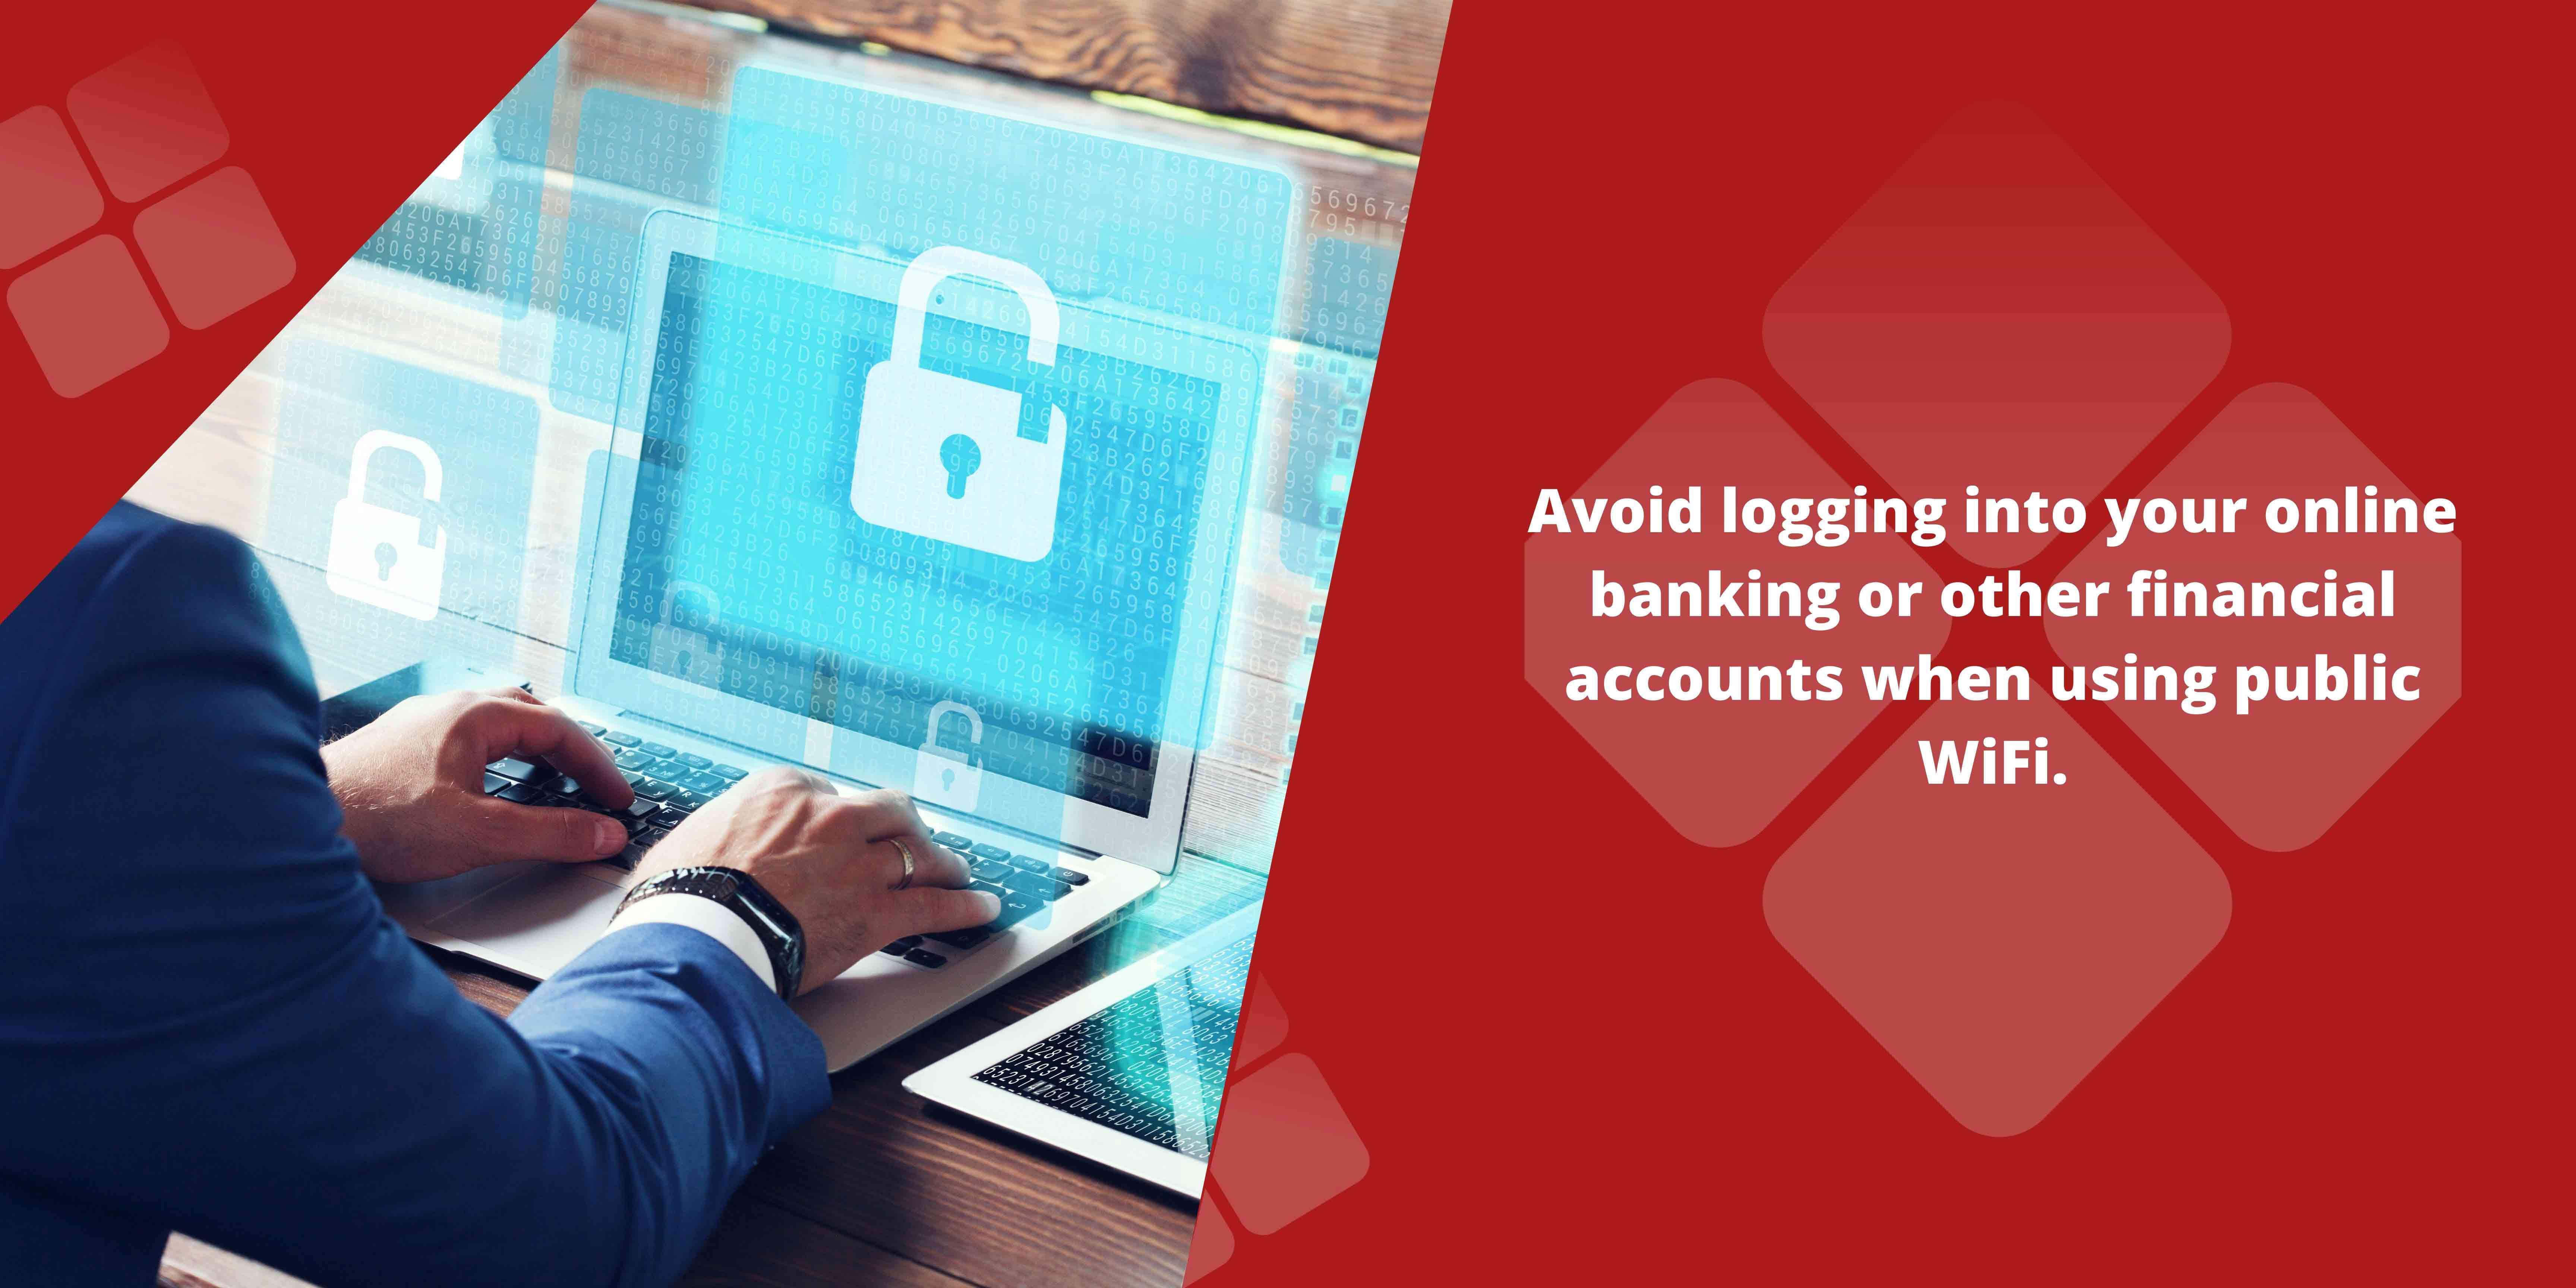 Avoid logging into your online banking or other financial accounts when using public WiFi.